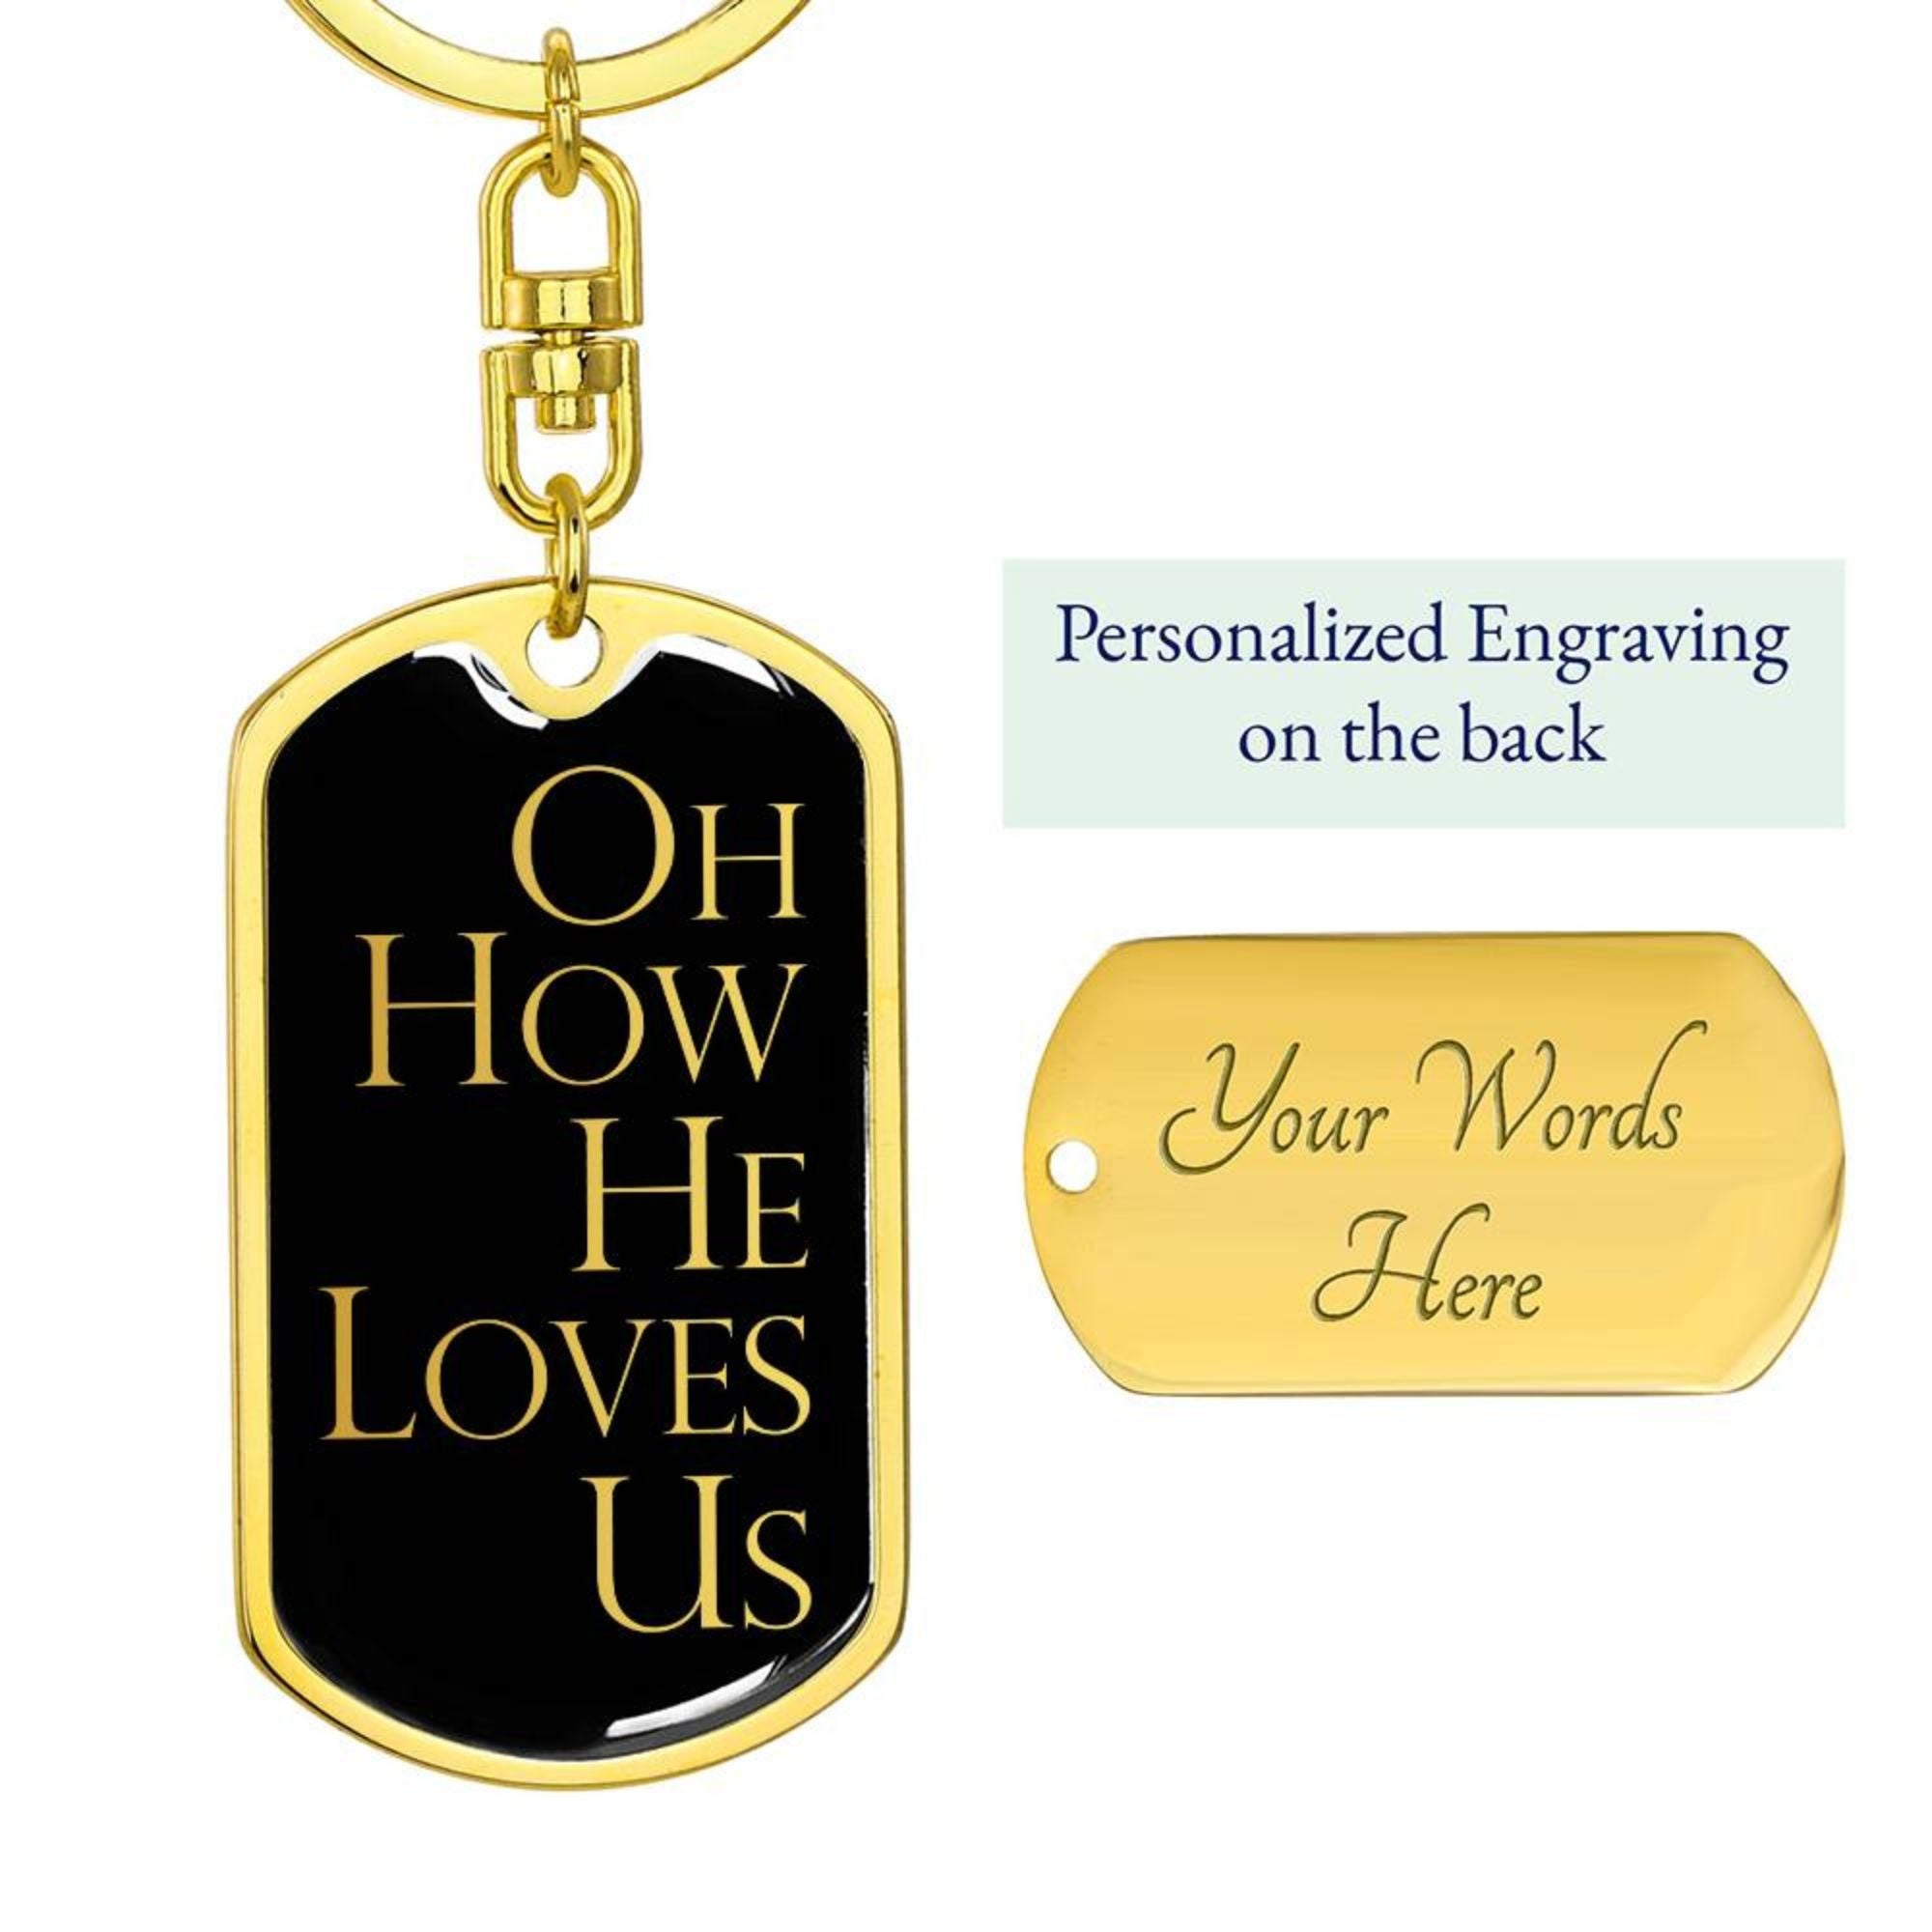 Oh How He Loves Us - Gold Dog Tag with Swivel Keychain Engraving: Yes Jesus Passion Apparel